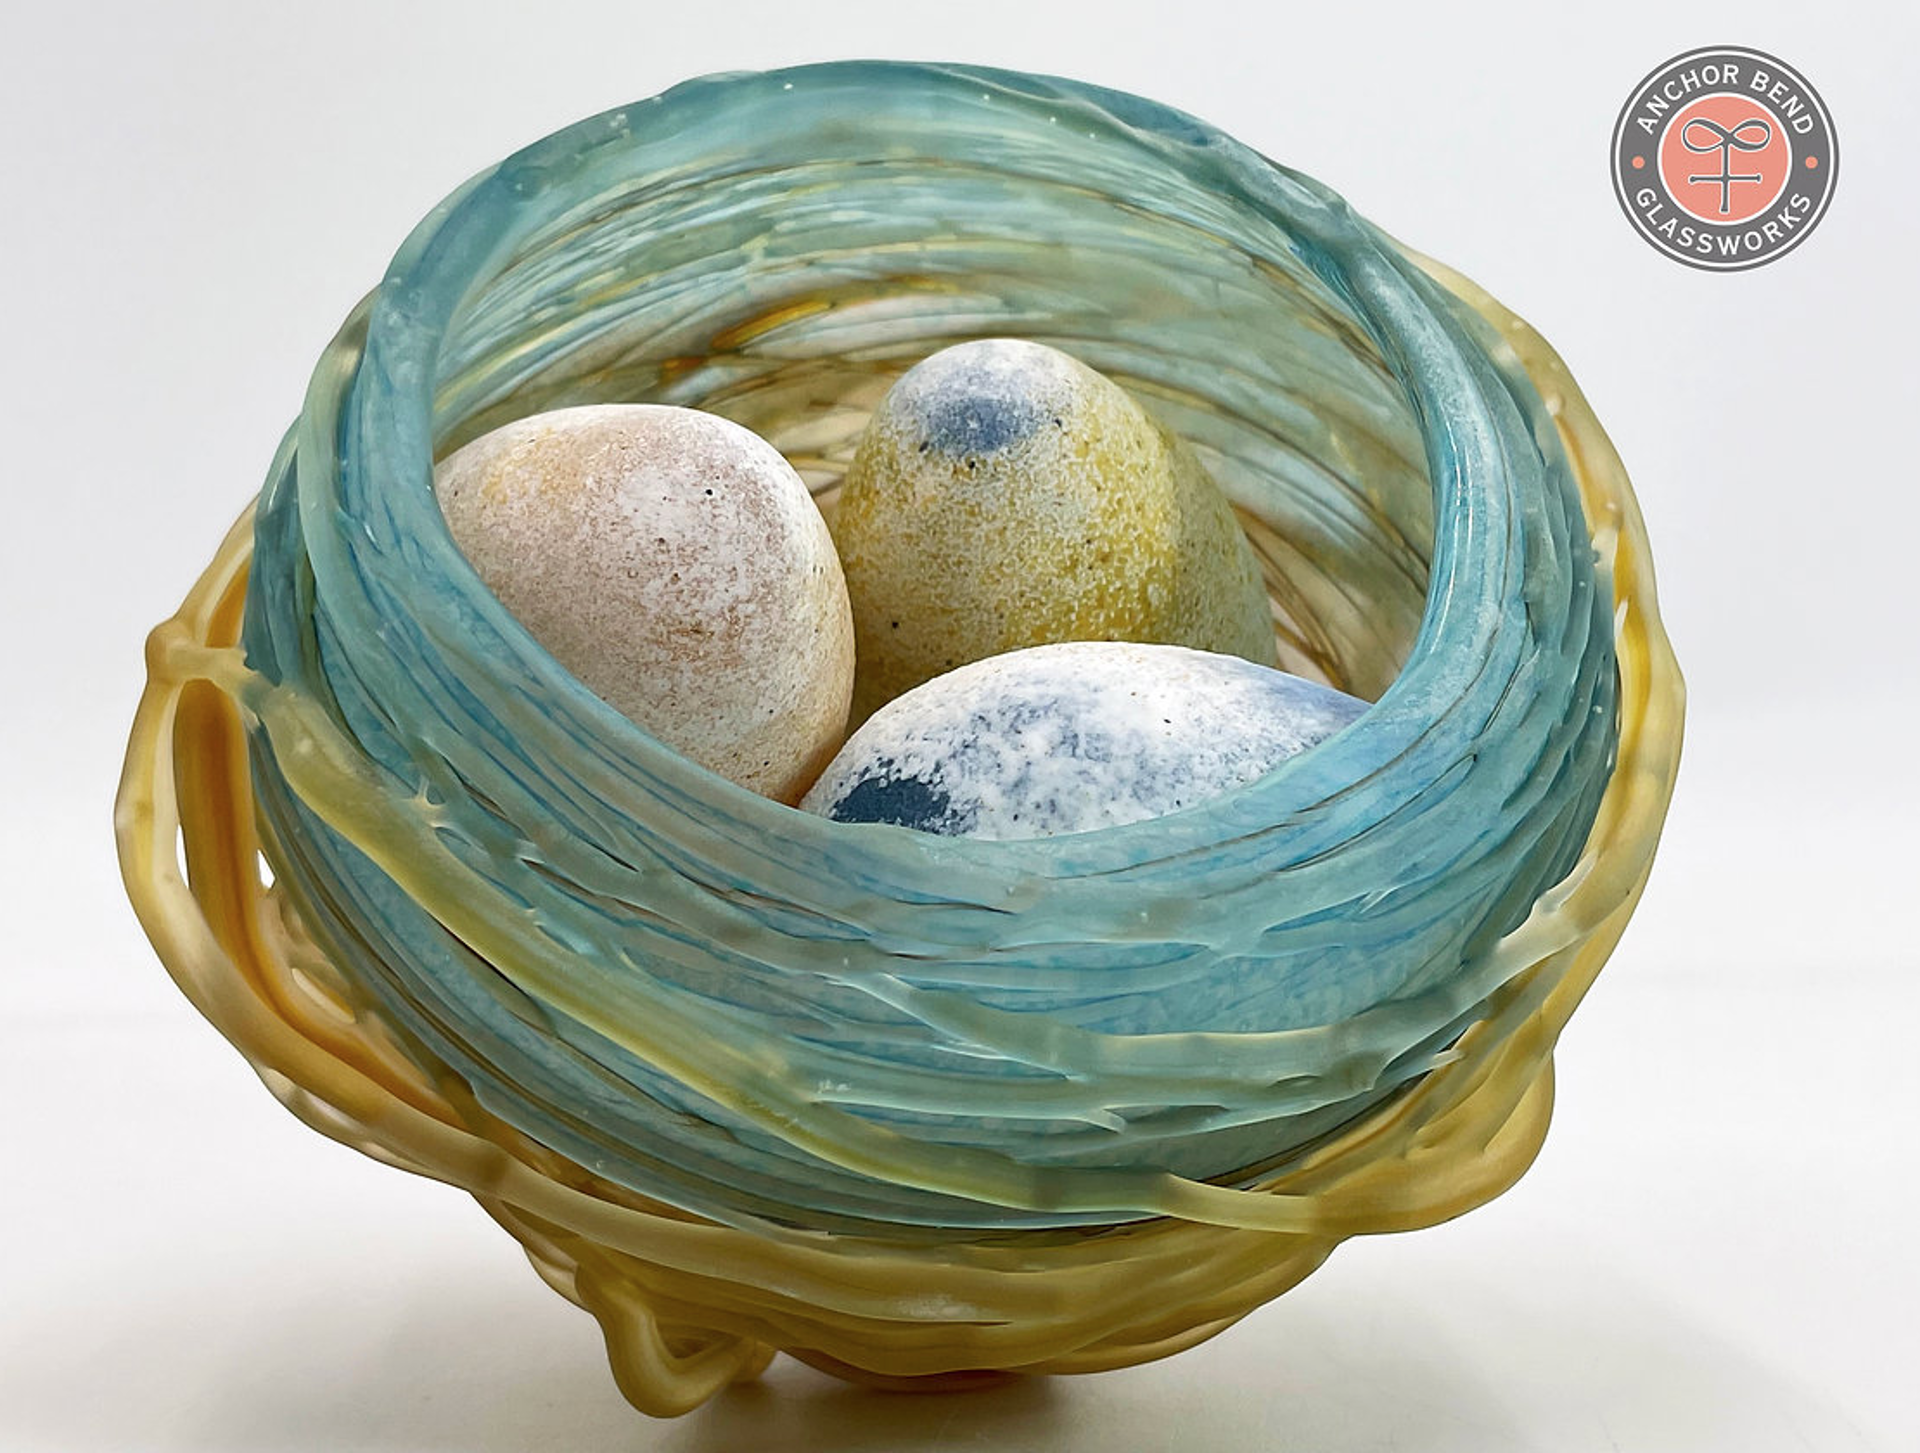 Bird's Nest with 3 Eggs by Anchor Bend Glassworks